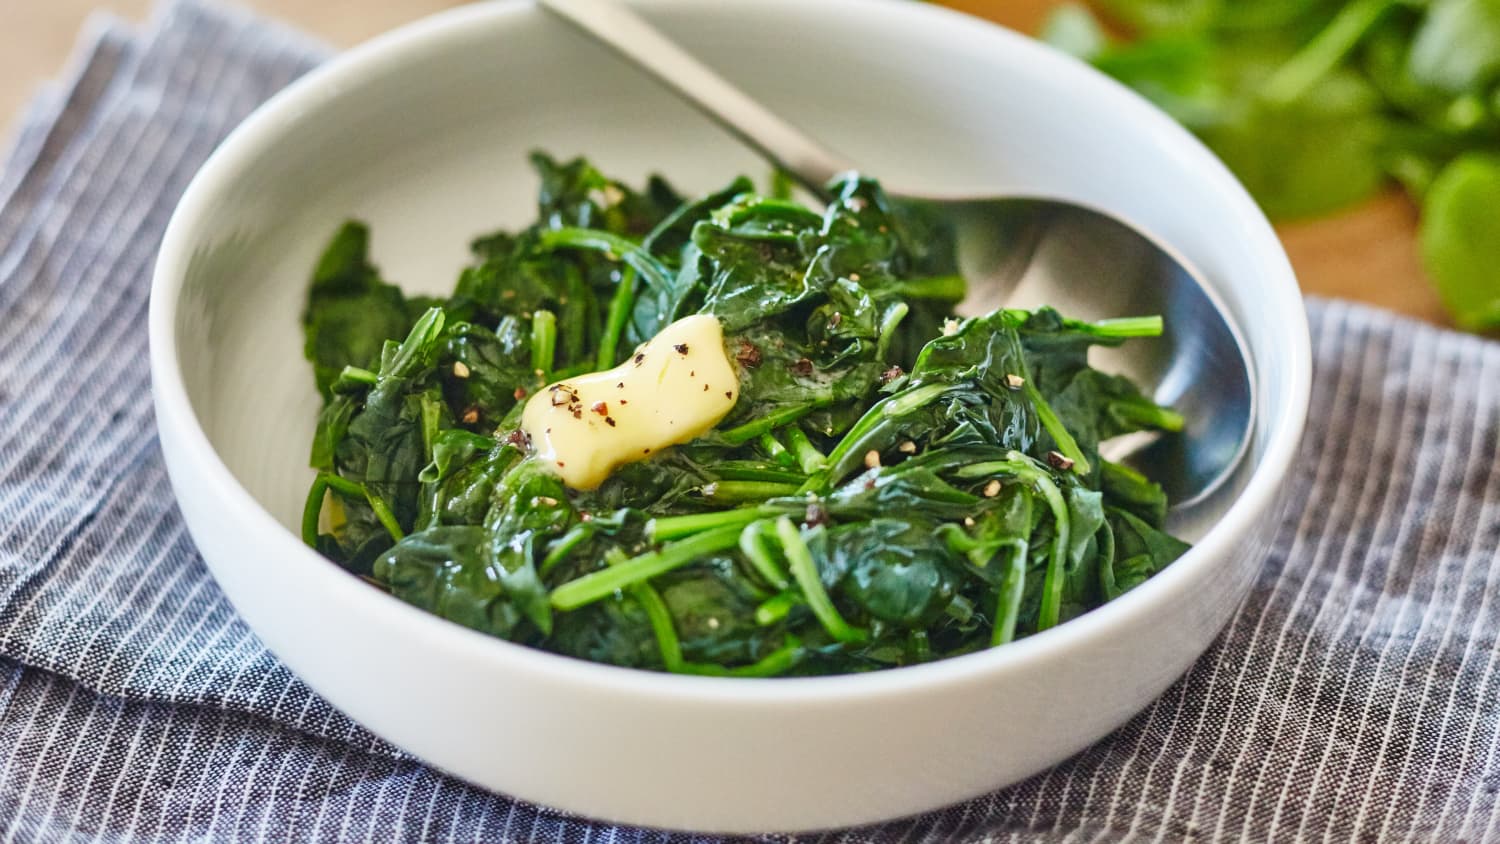 How To Quickly Cook Spinach on the Stovetop